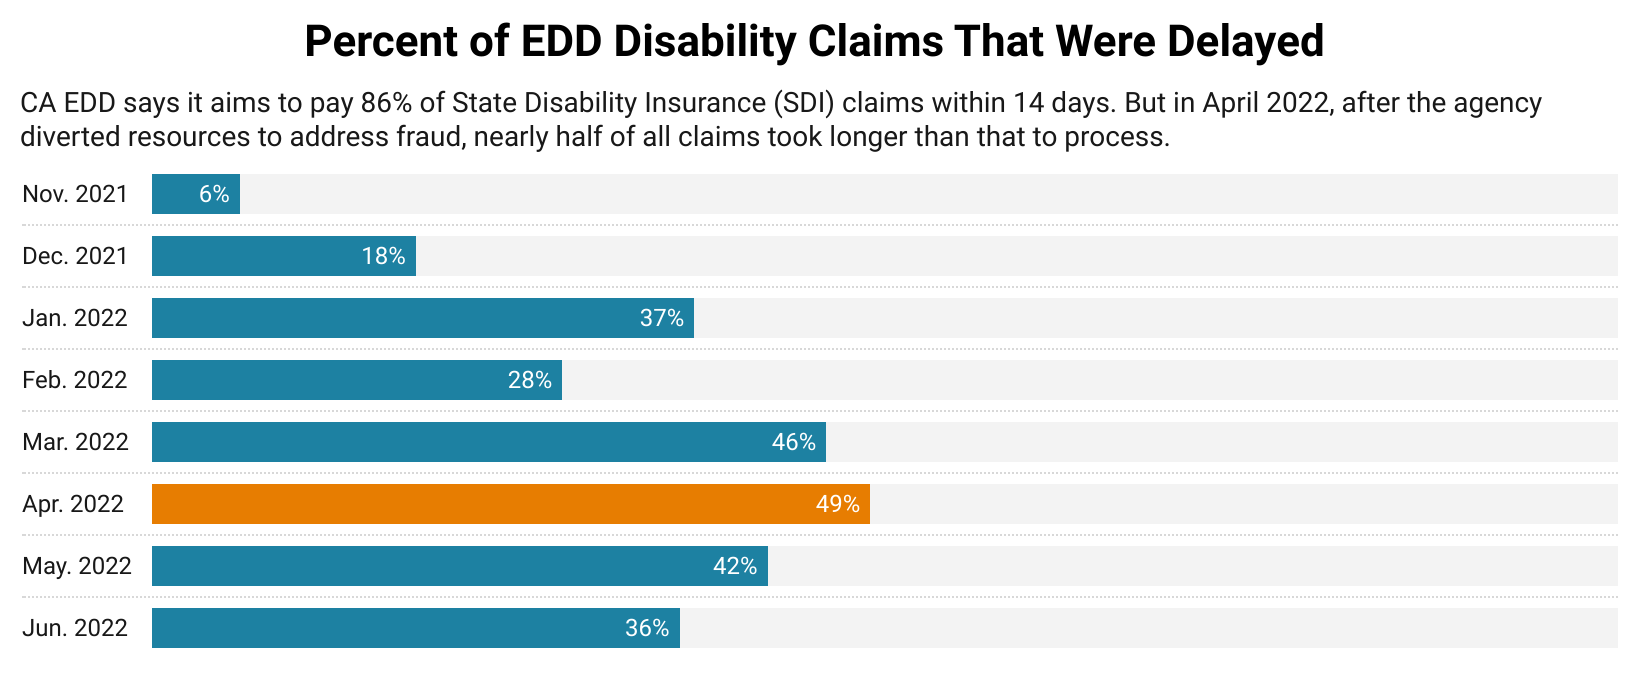 A horizontal bar chart showing the percentage of EDD disability claims from Nov. 2021 - June 2022.